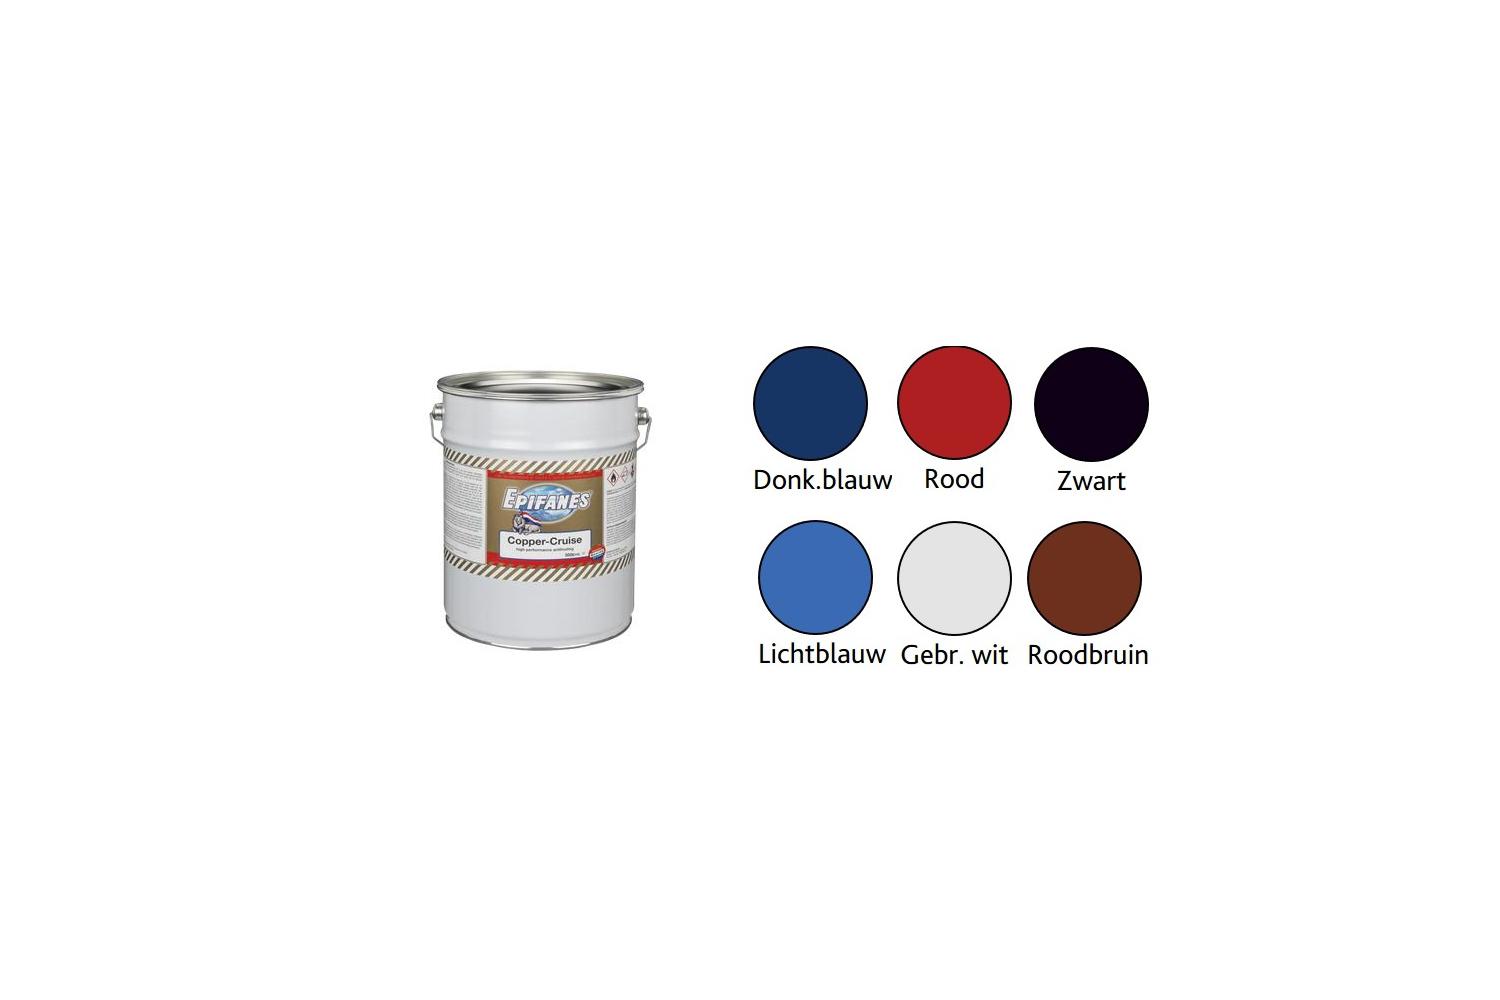 Epifanes Copper Cruise antifouling rood 5000 ml